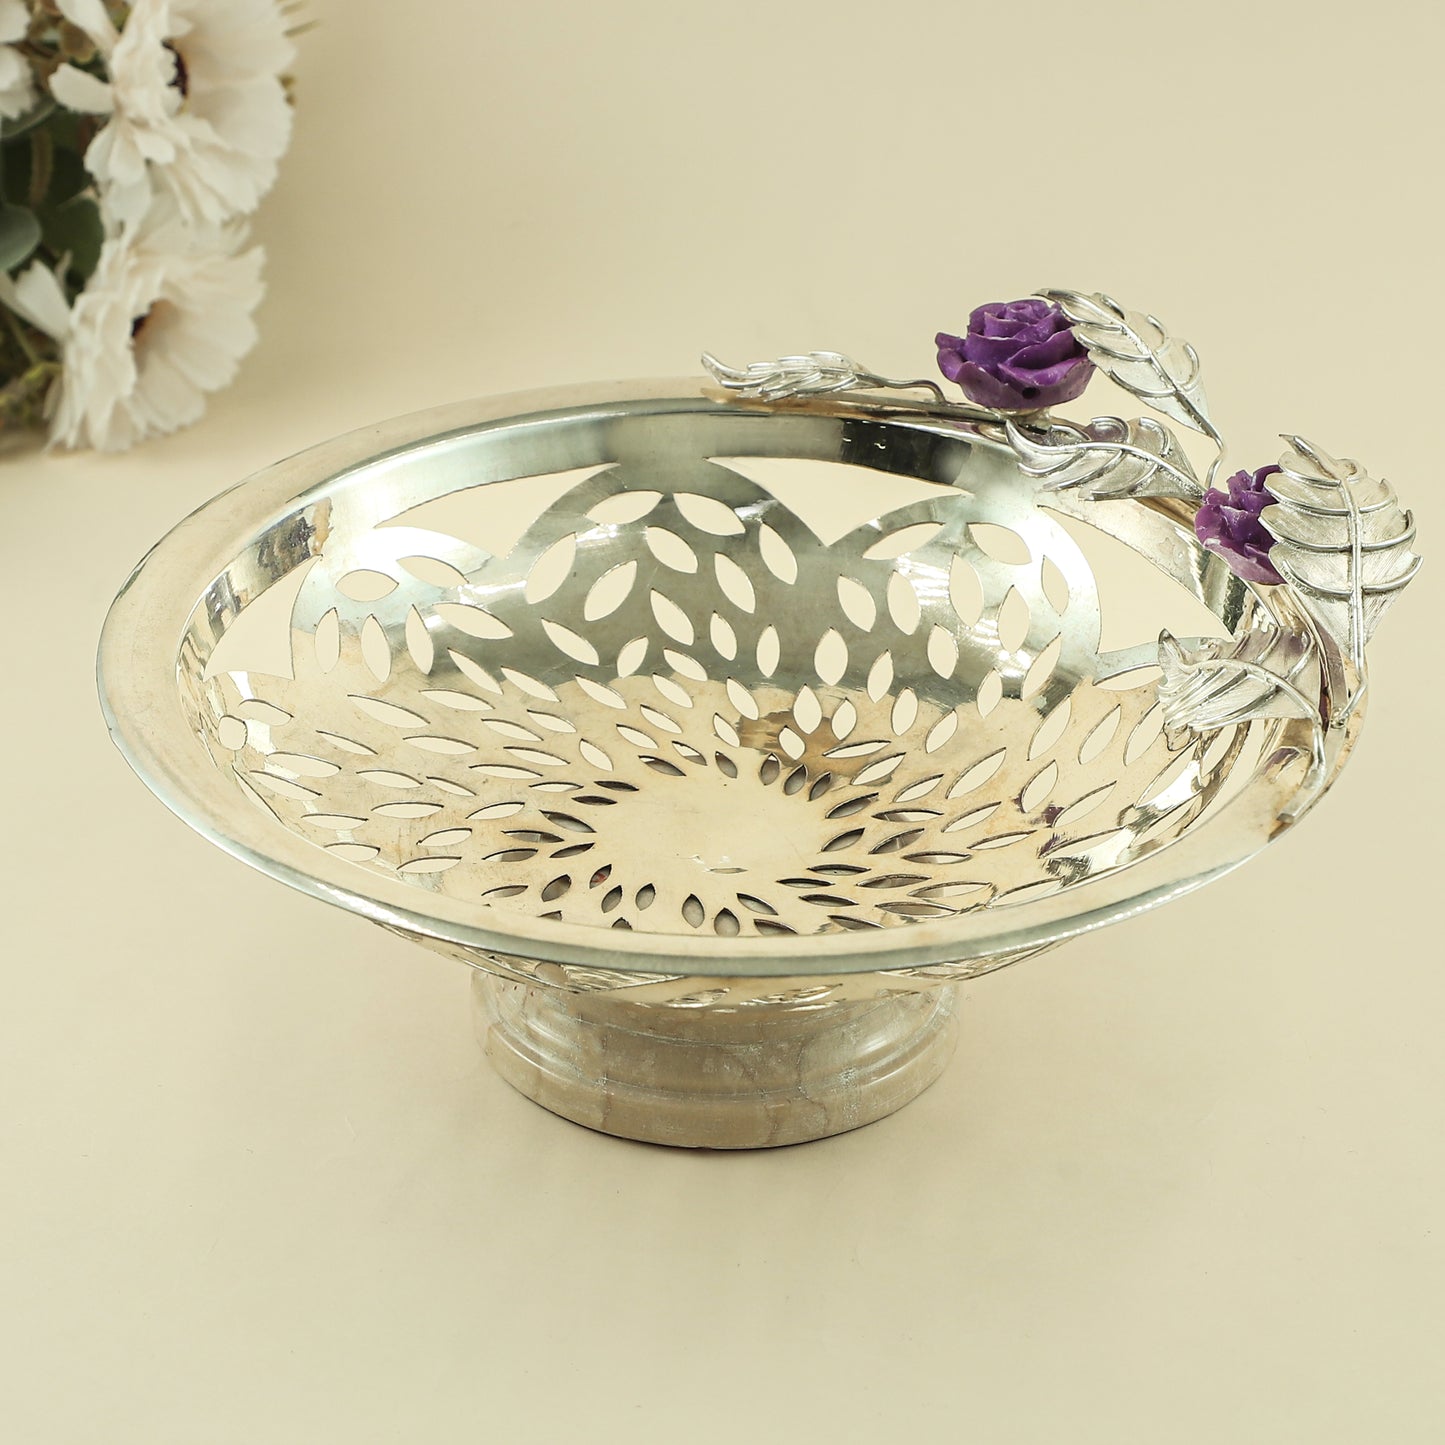 Marie Ethereal Silver Bowl